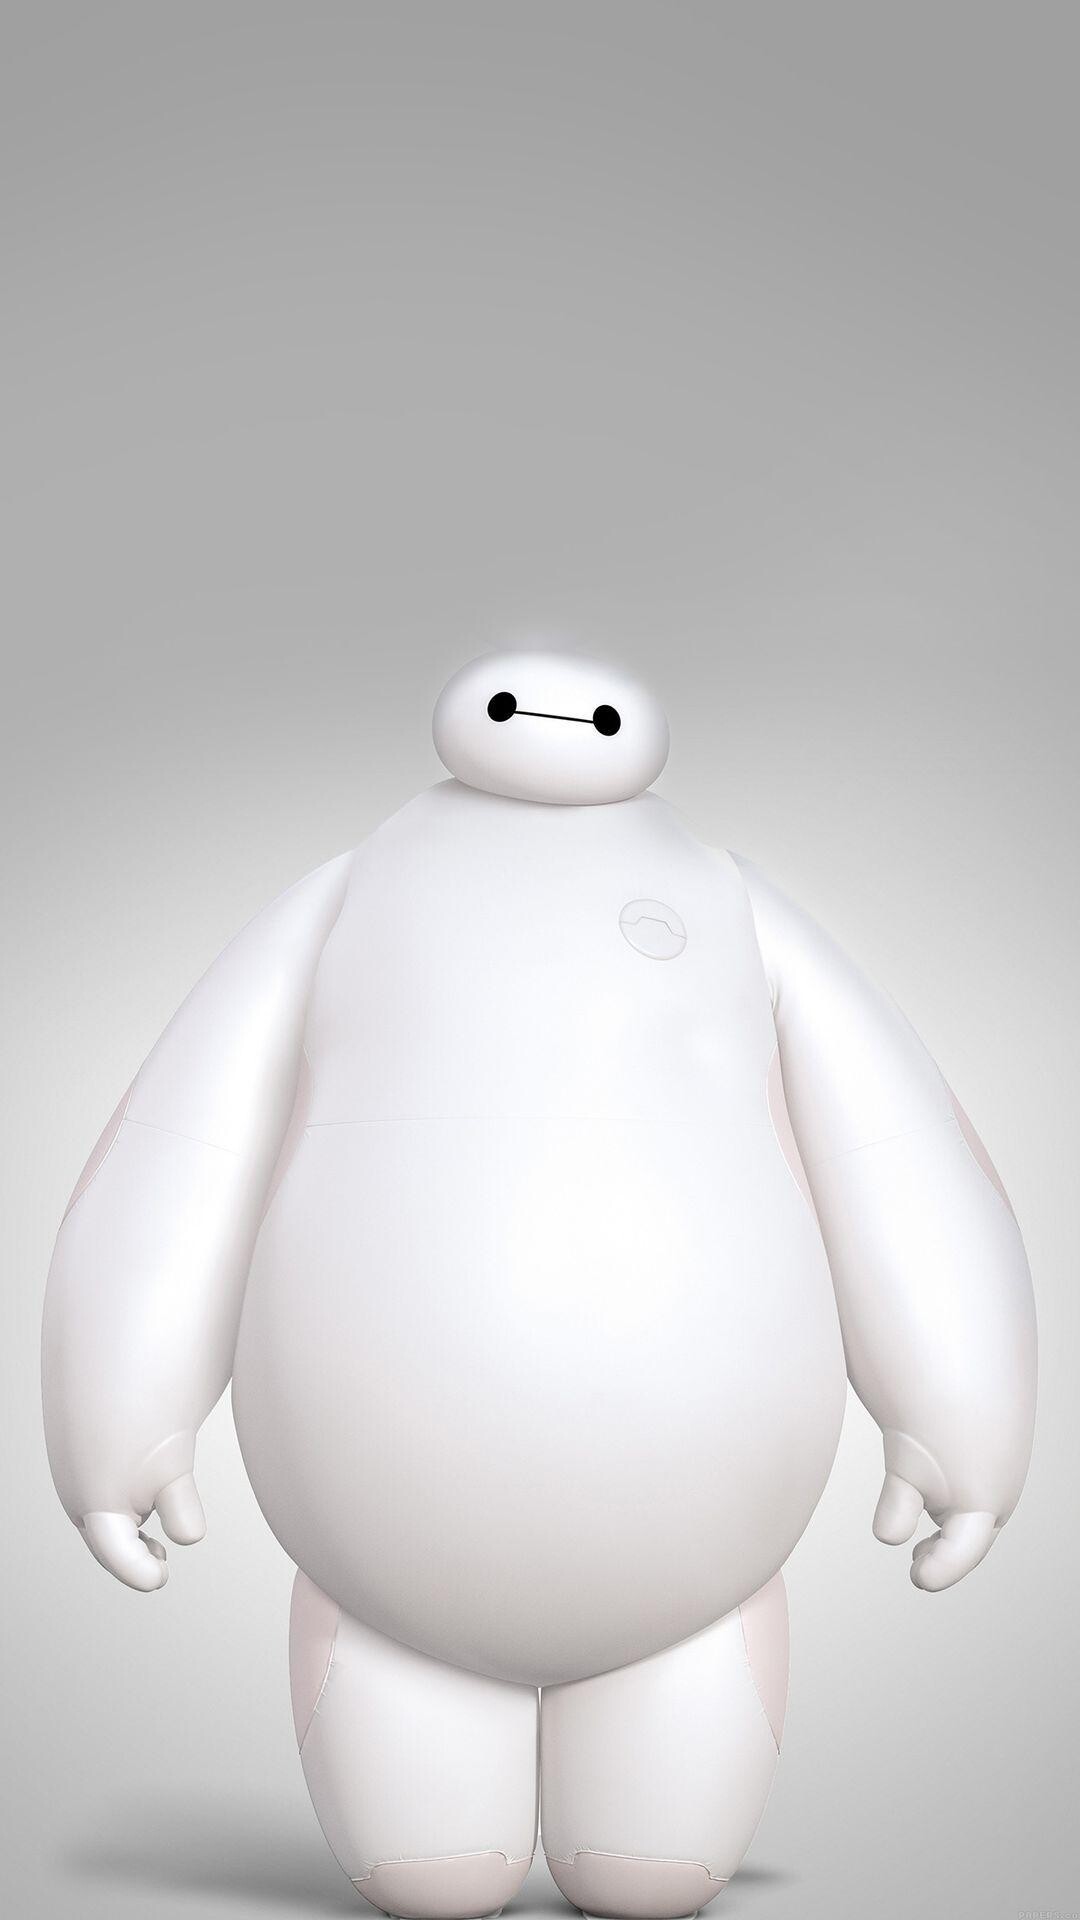 Baymax! (TV Series): An American superhero science fiction comedy television series created by Don Hall for Disney+. 1080x1920 Full HD Wallpaper.